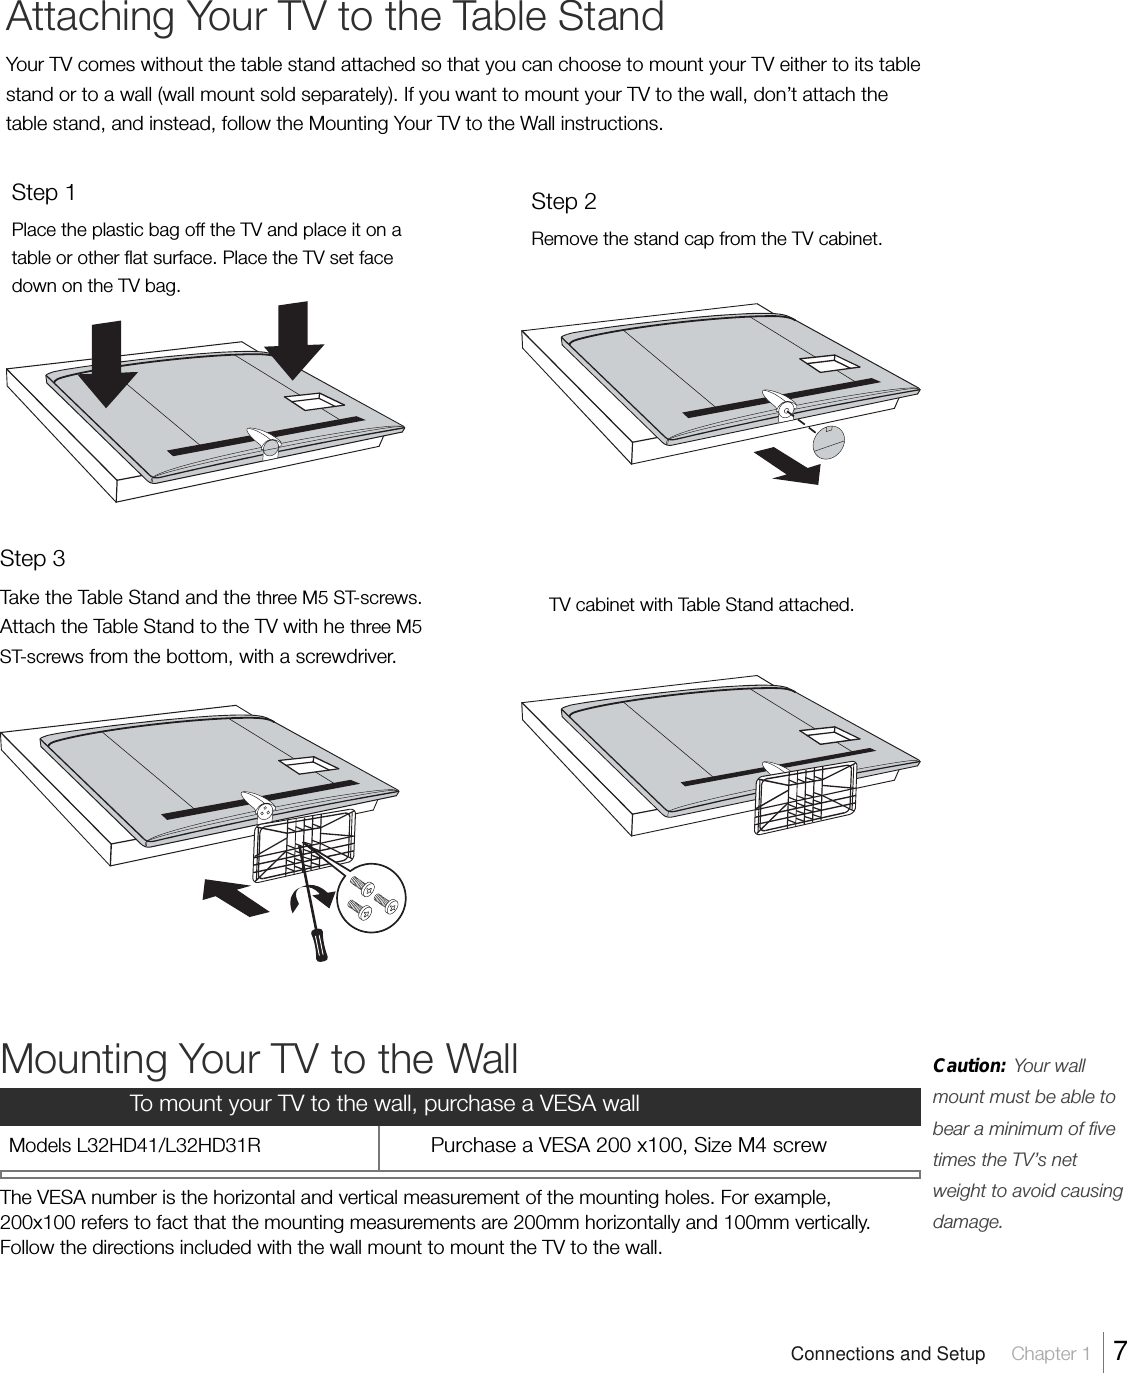 Attaching Your TV to the Table StandYour TV comes without the table stand attached so that you can choose to mount your TV either to its tablestand or to a wall (wall mount sold separately). If you want to mount your TV to the wall, don’t attach thetable stand, and instead, follow the Mounting Your TV to the Wall instructions.Step 1Place the plastic bag off the TV and place it on atable or other flat surface. Place the TV set facedown on the TV bag.Step 3Take the Table Stand and the three M5 ST-screws.Attach the Table Stand to the TV with he three M5ST-screws from the bottom, with a screwdriver.Connections and Setup     Chapter 1    7Step 2Remove the stand cap from the TV cabinet.Mounting Your TV to the WallThe VESA number is the horizontal and vertical measurement of the mounting holes. For example,200x100 refers to fact that the mounting measurements are 200mm horizontally and 100mm vertically.Follow the directions included with the wall mount to mount the TV to the wall.Caution:     Your wallmount must be able tobear a minimum of fivetimes the TV’s netweight to avoid causingdamage.To mount your TV to the wall, purchase a VESA wallTV cabinet with Table Stand attached.Models L32HD41/L32HD31R Purchase a VESA 200 x100, Size M4 screw